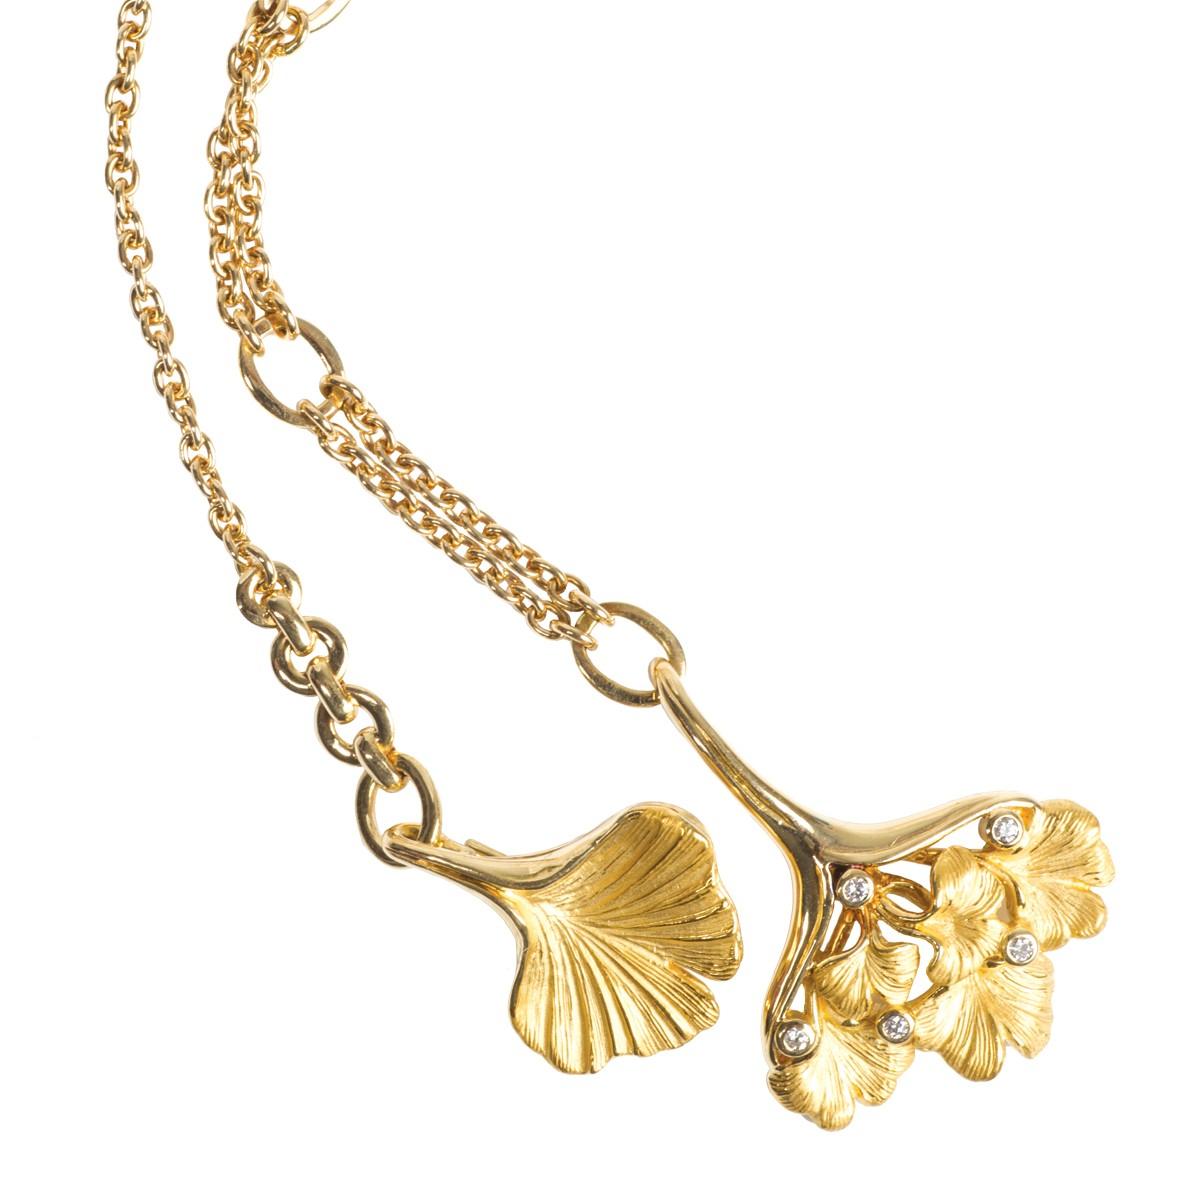 Carrera y Carrera 18 Karat Yellow Gold Diamond Ginkgo Leaf Lariat Necklace In Good Condition For Sale In San Diego, CA